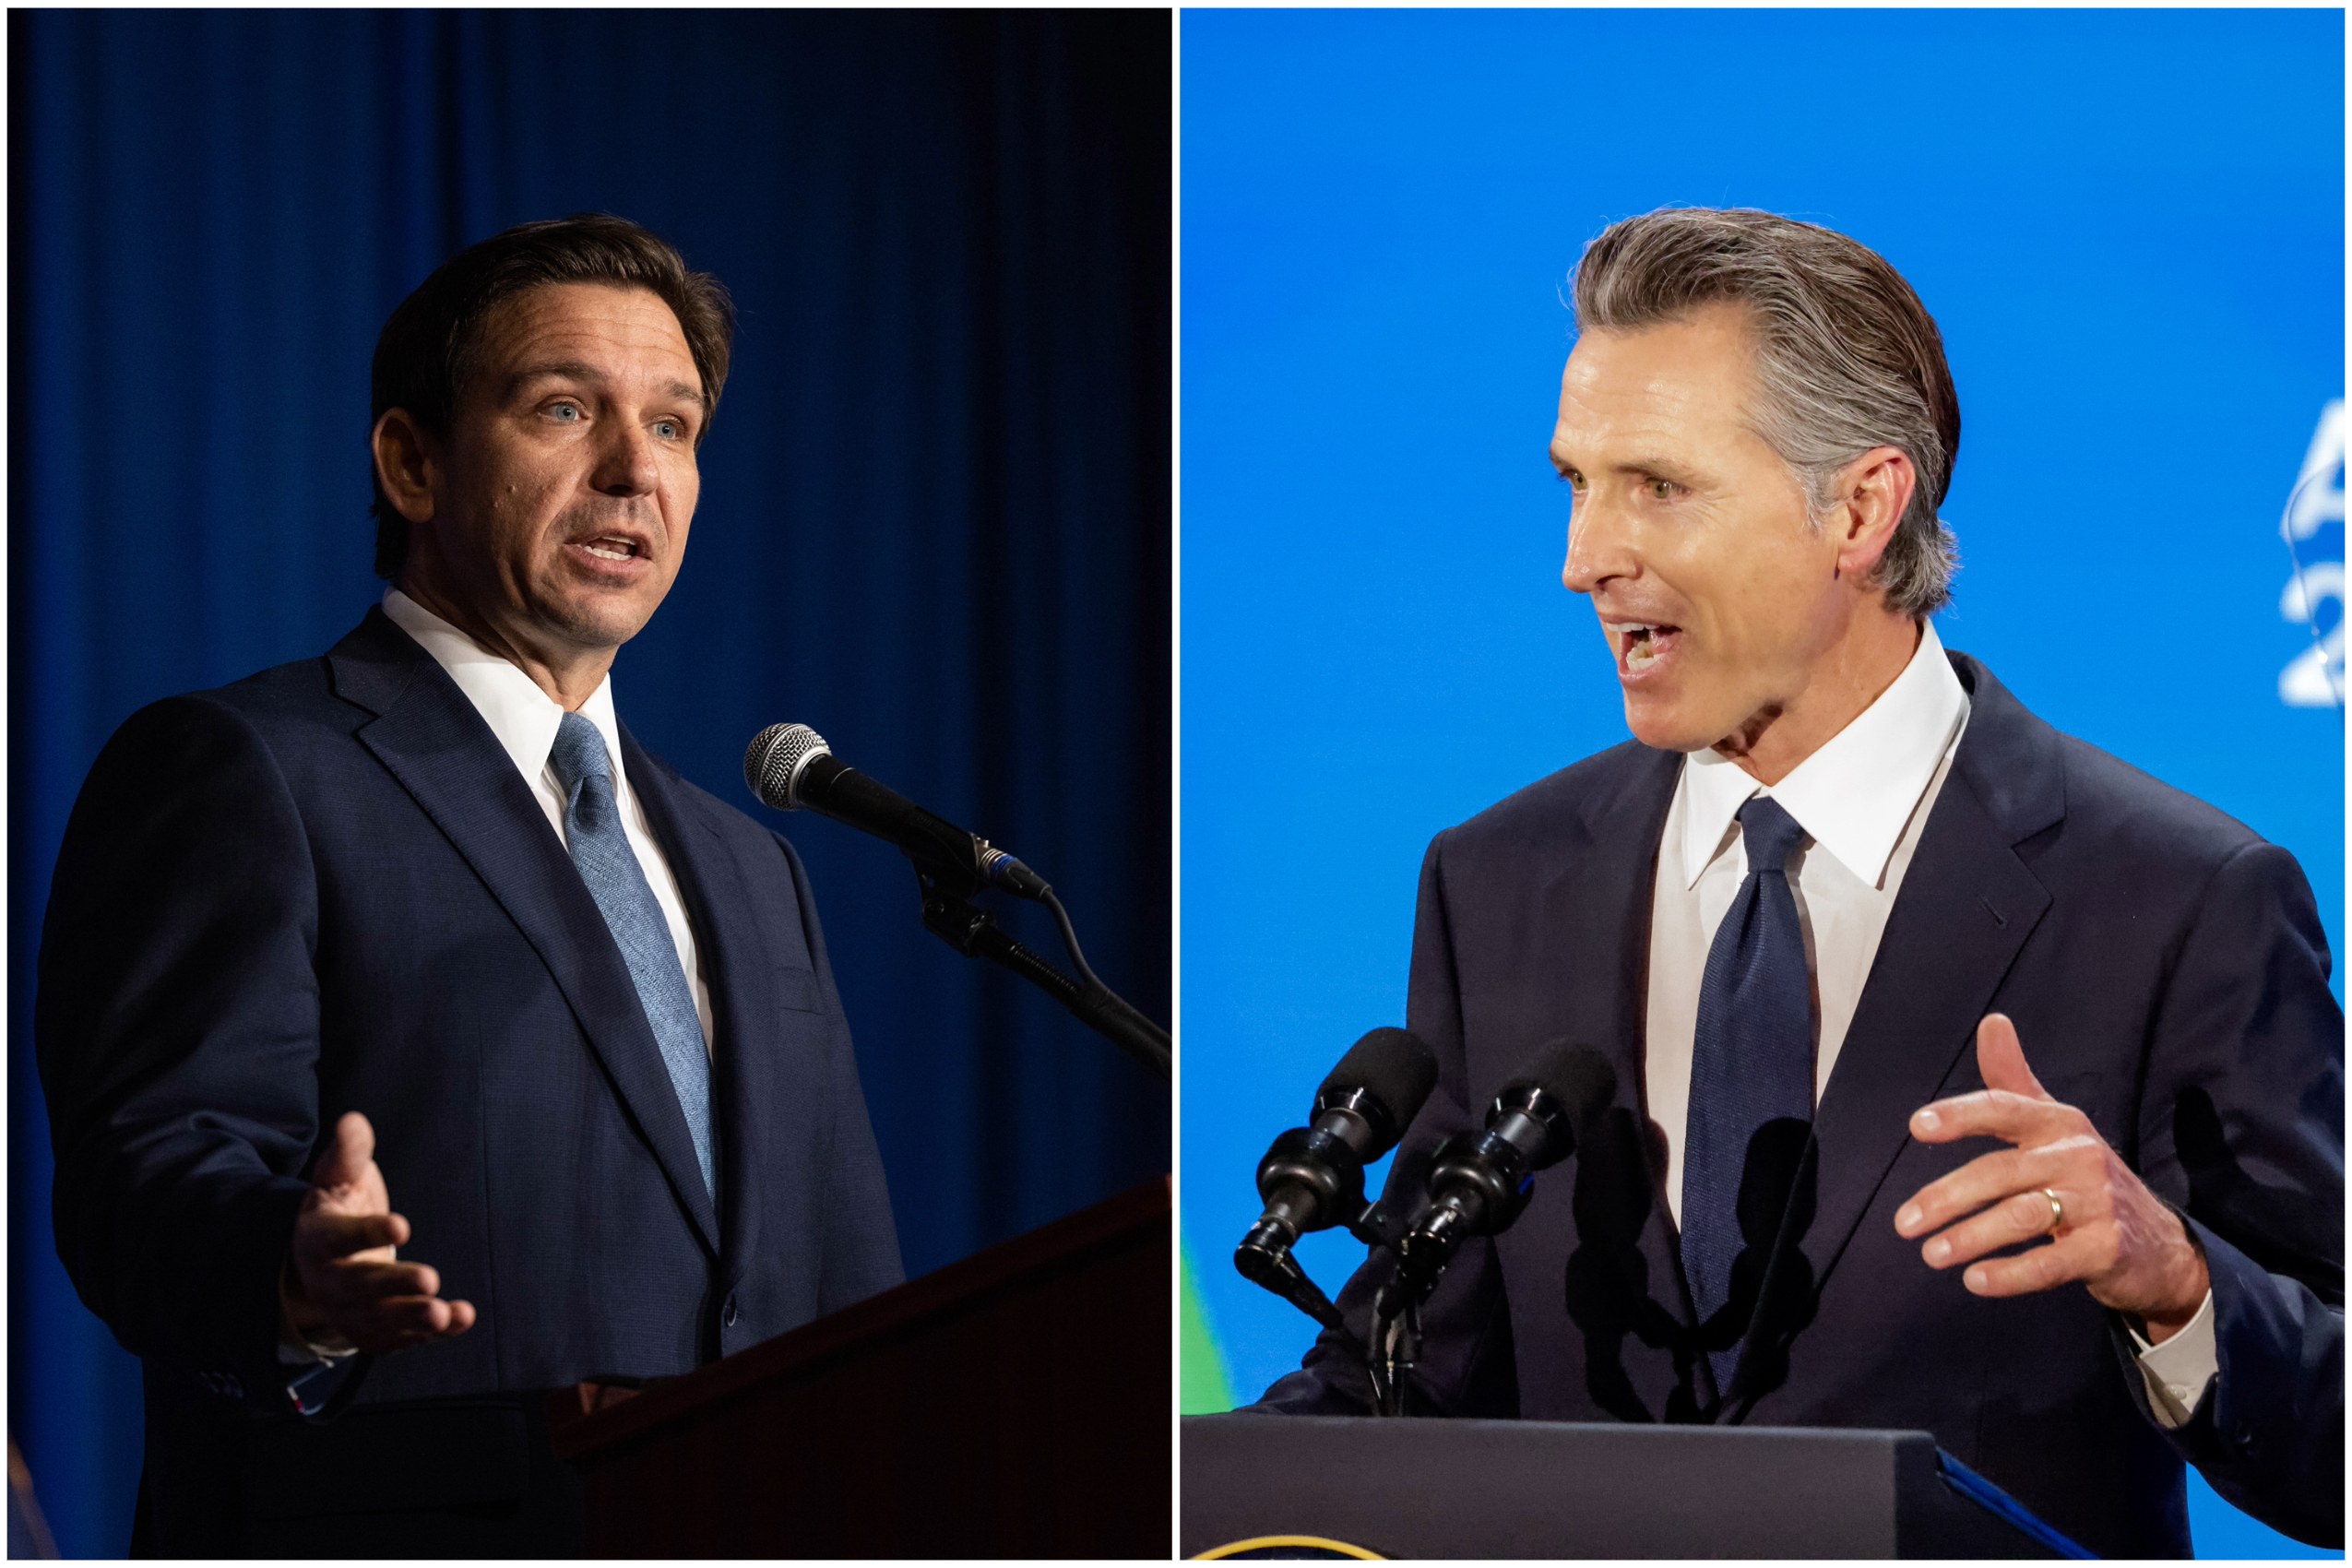 A composite image of Florida Gov. Ron DeSantis, left, and Gov. Gavin Newson, right wearing suits and speaking on a podium.